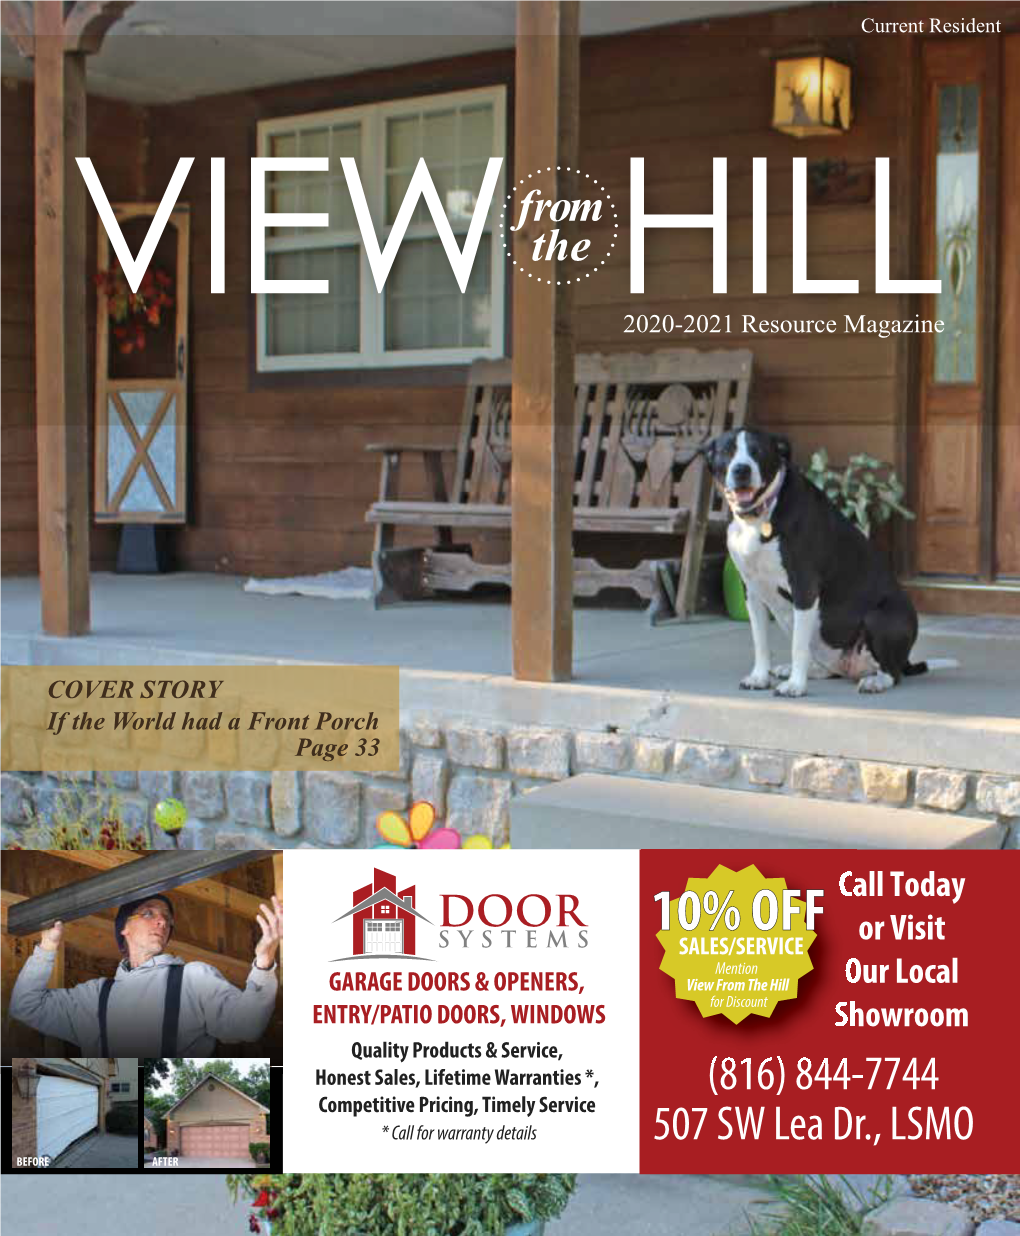 From the VIEW HILL 2020-2021 Resource Magazine